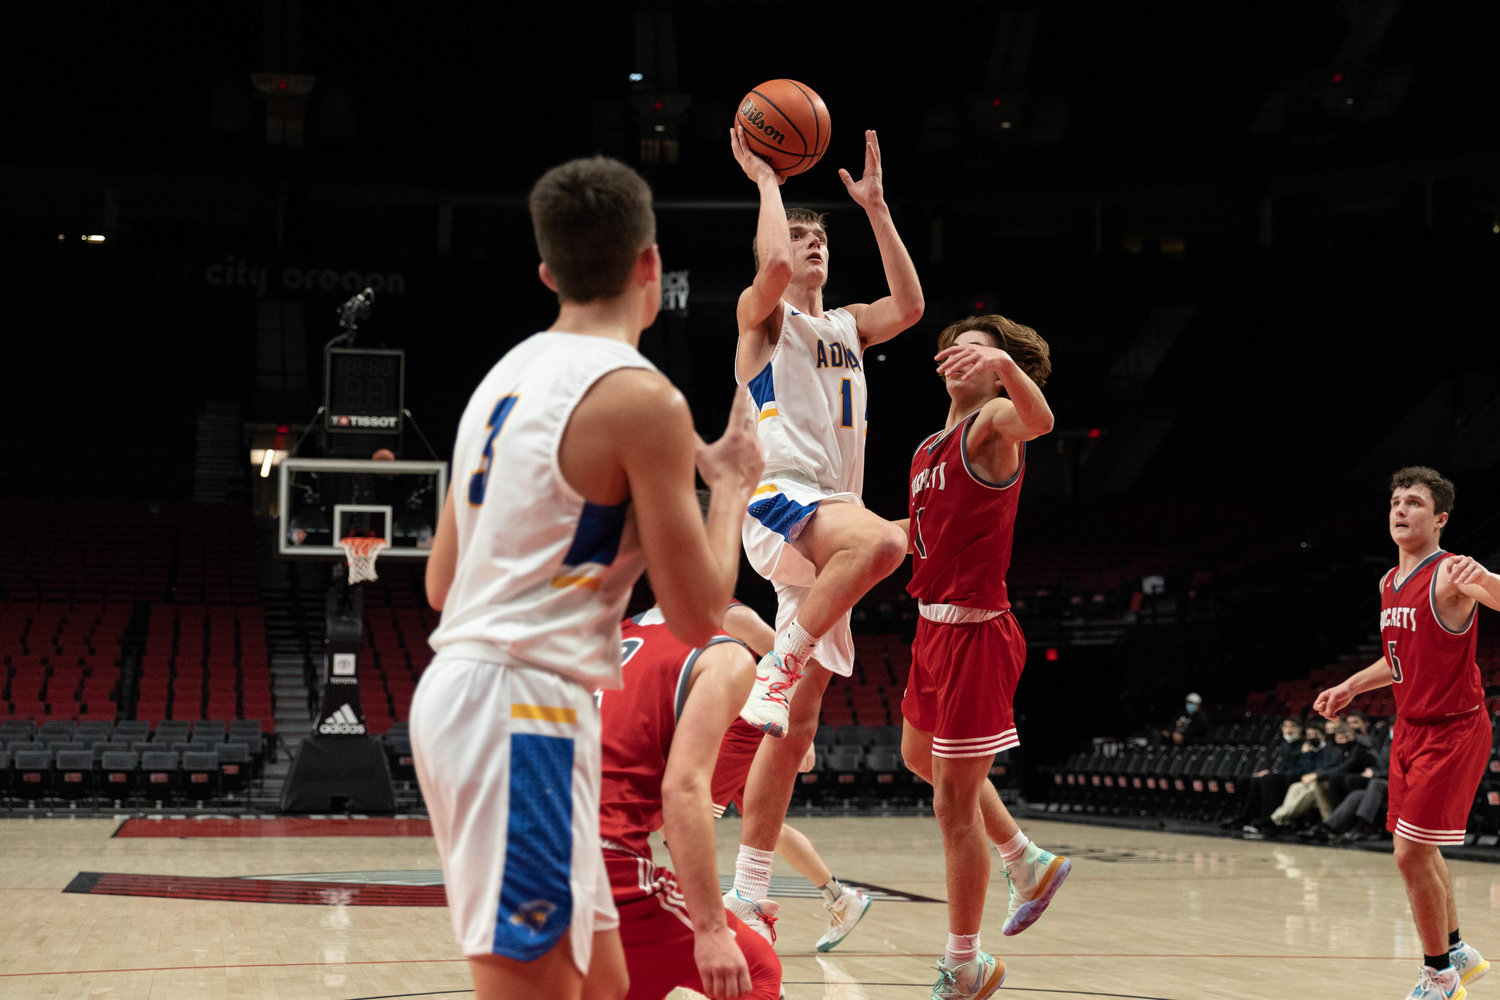 Adna guard Seth Meister attempts a floater against Castle Rock at the Moda Center in Portland Dec. 18.